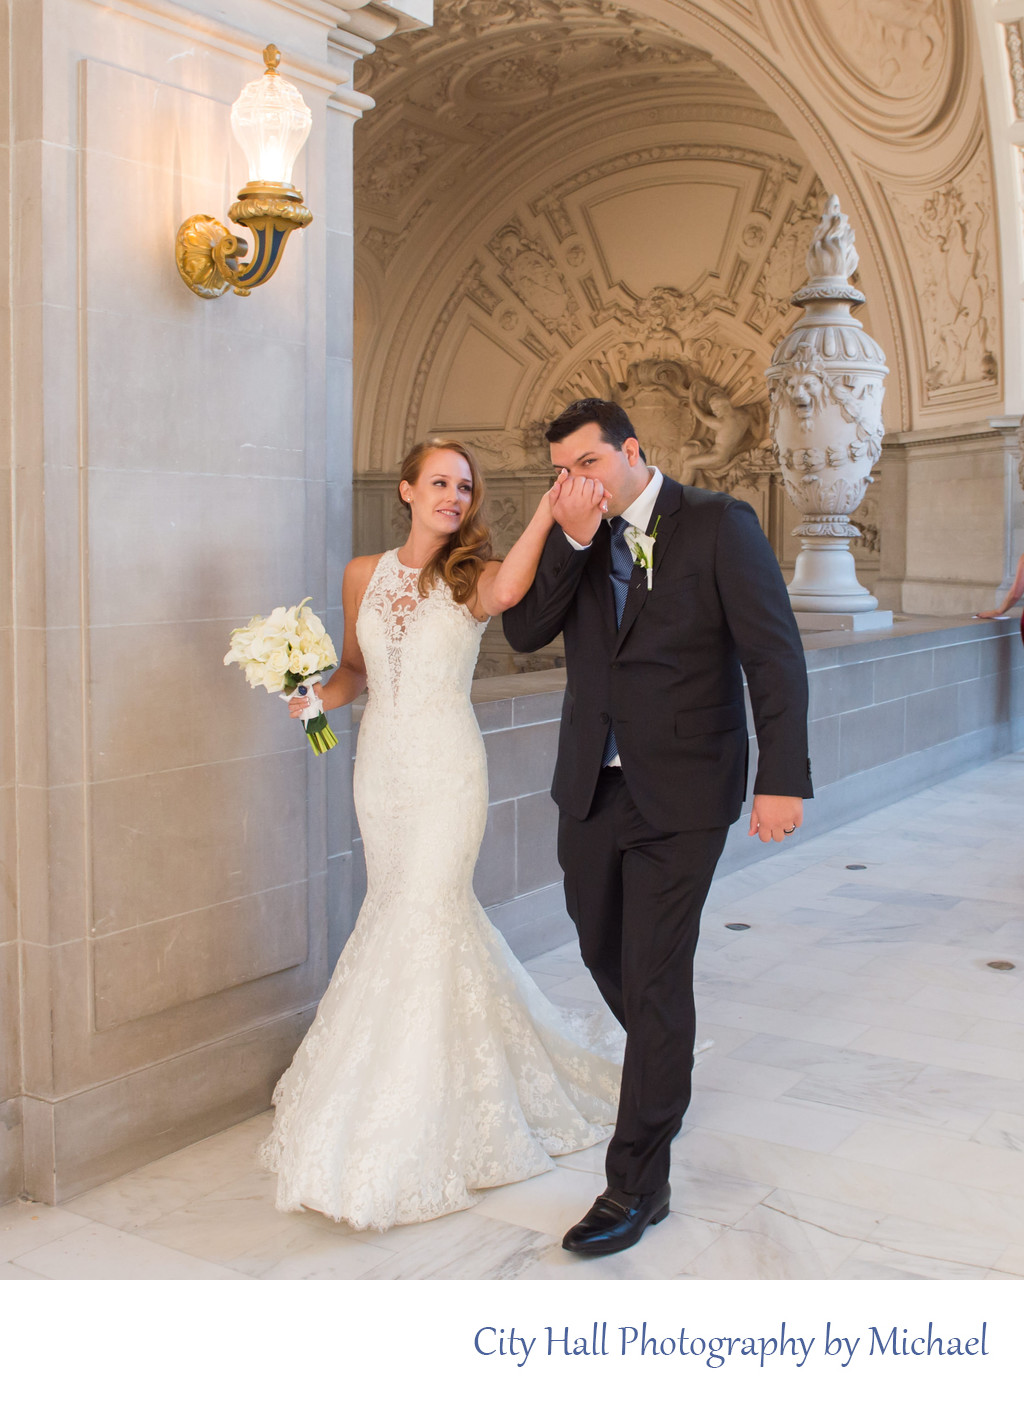 Candid photo of Newlyweds after wedding ceremony at San Francisco city hall